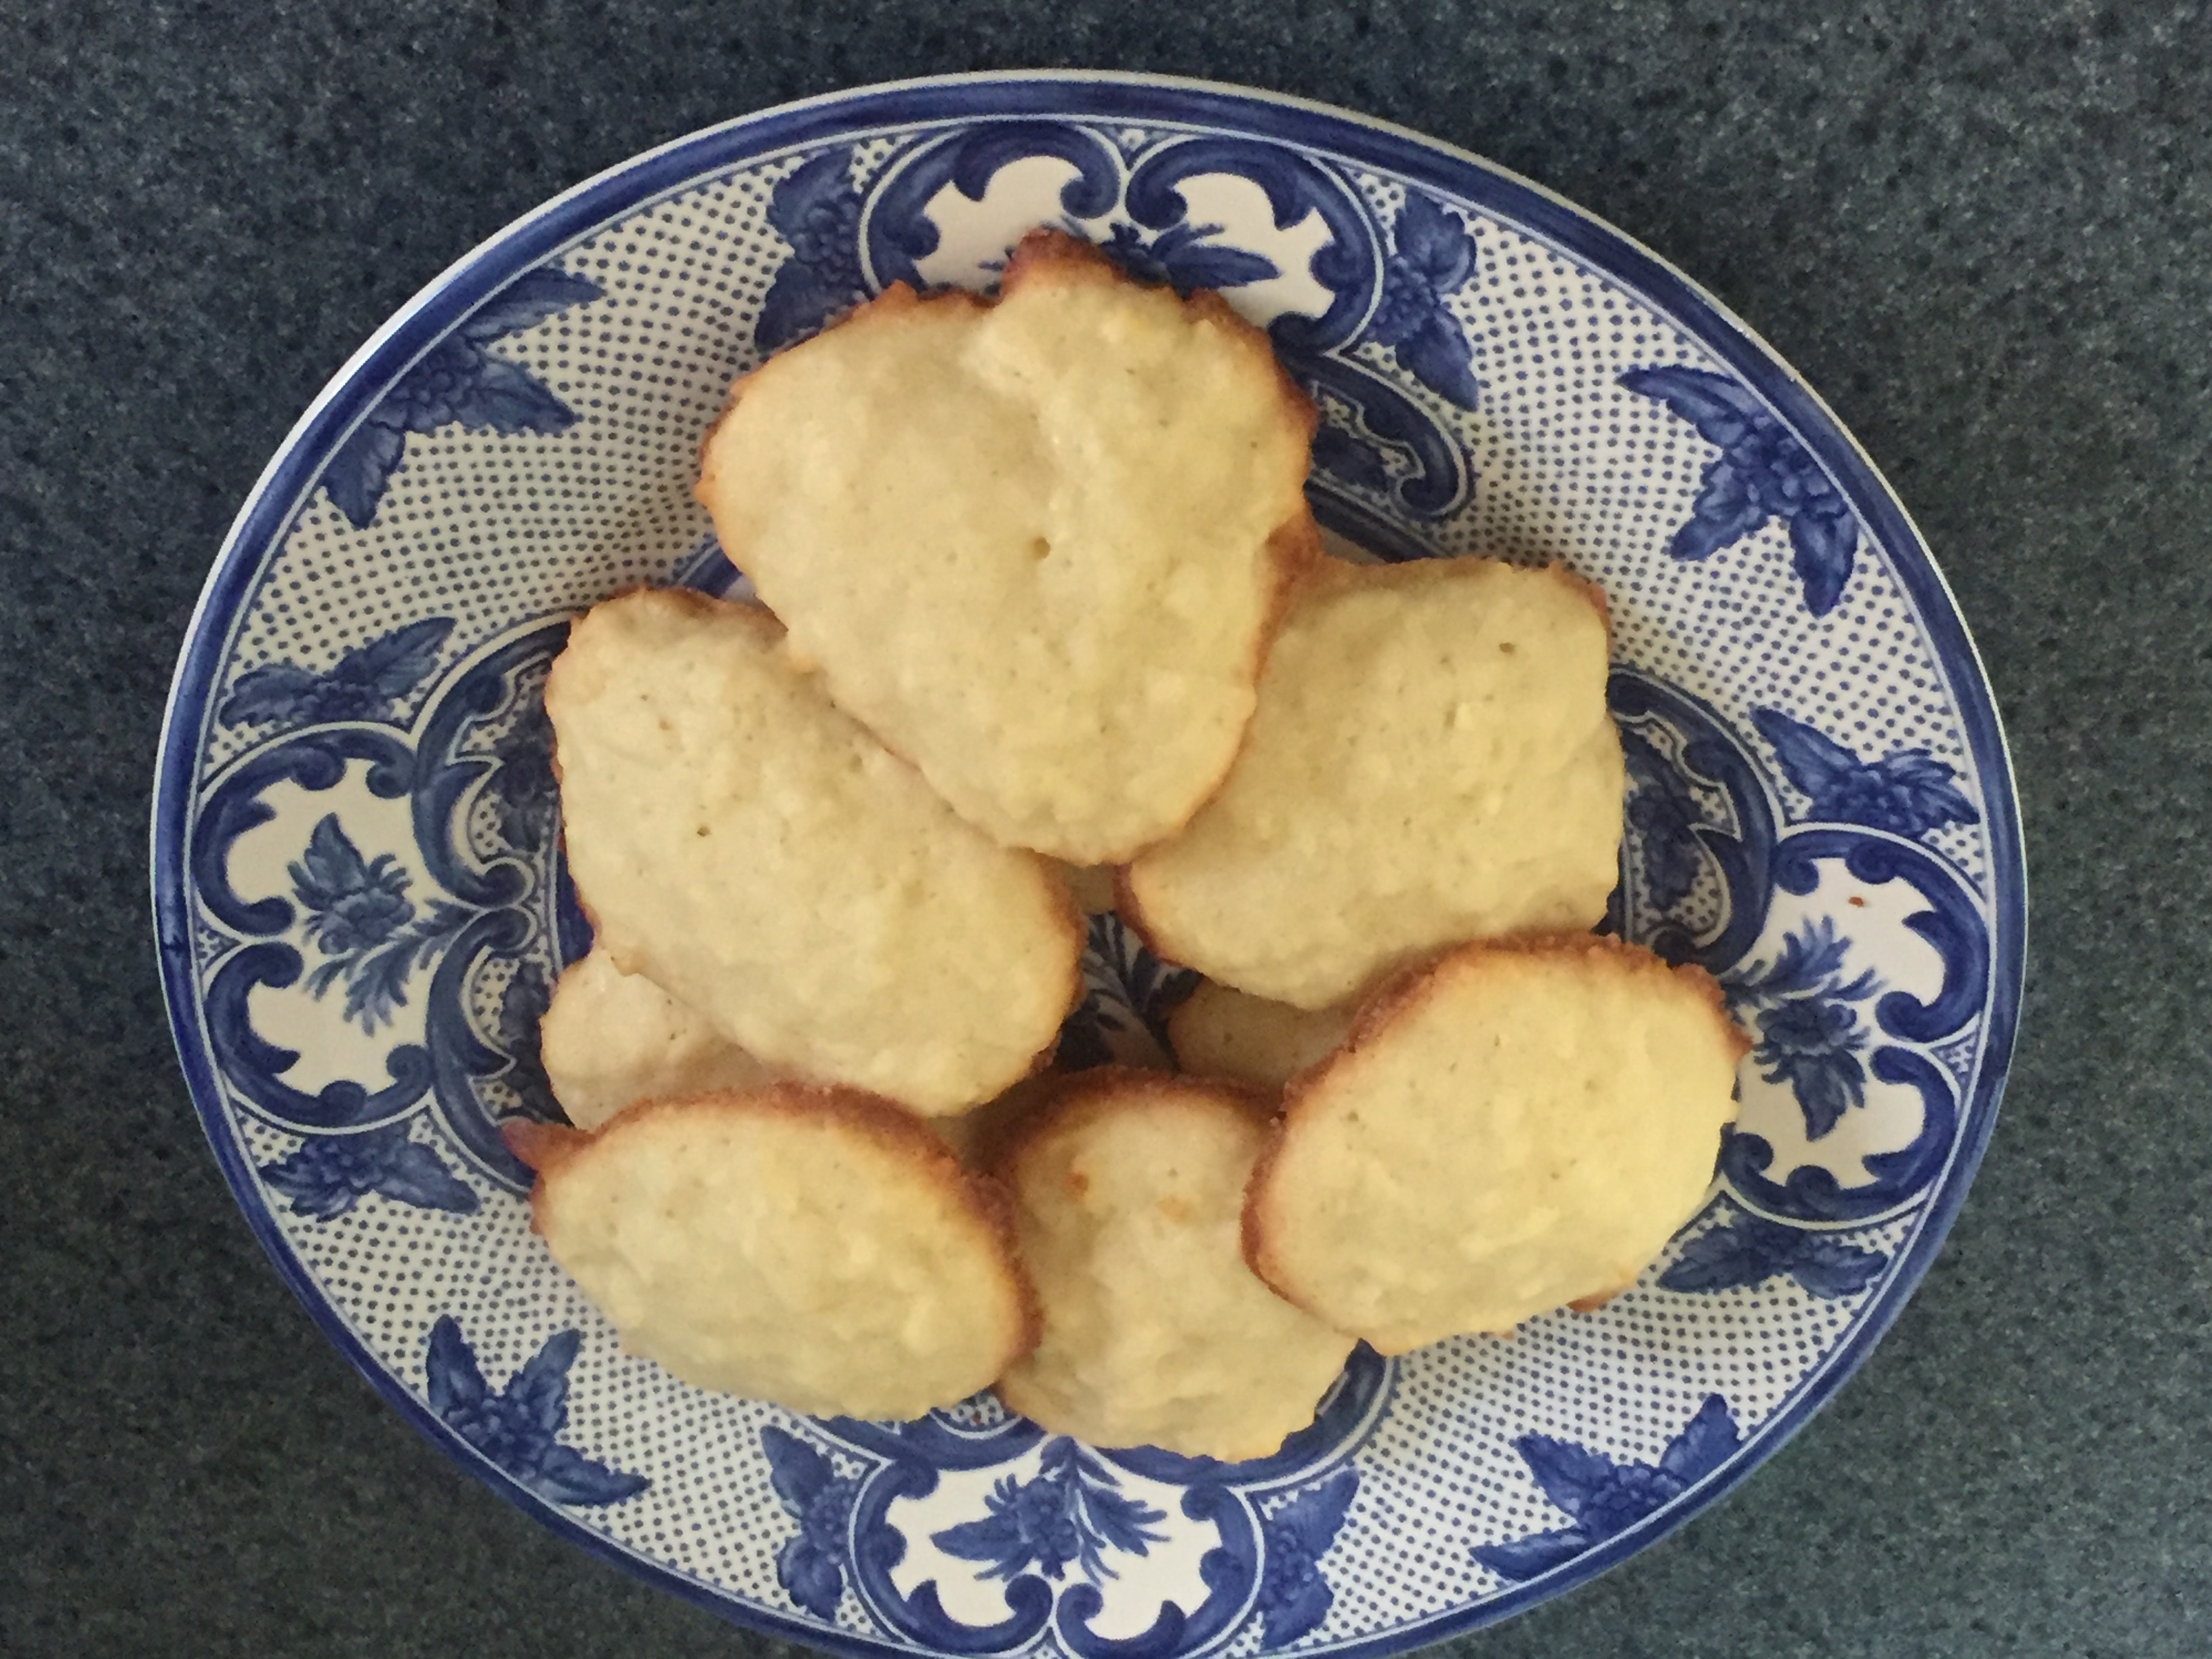 Eight lightly browned coconut jumbal cookies are stacked on a decorative blue and white porcelain plate.